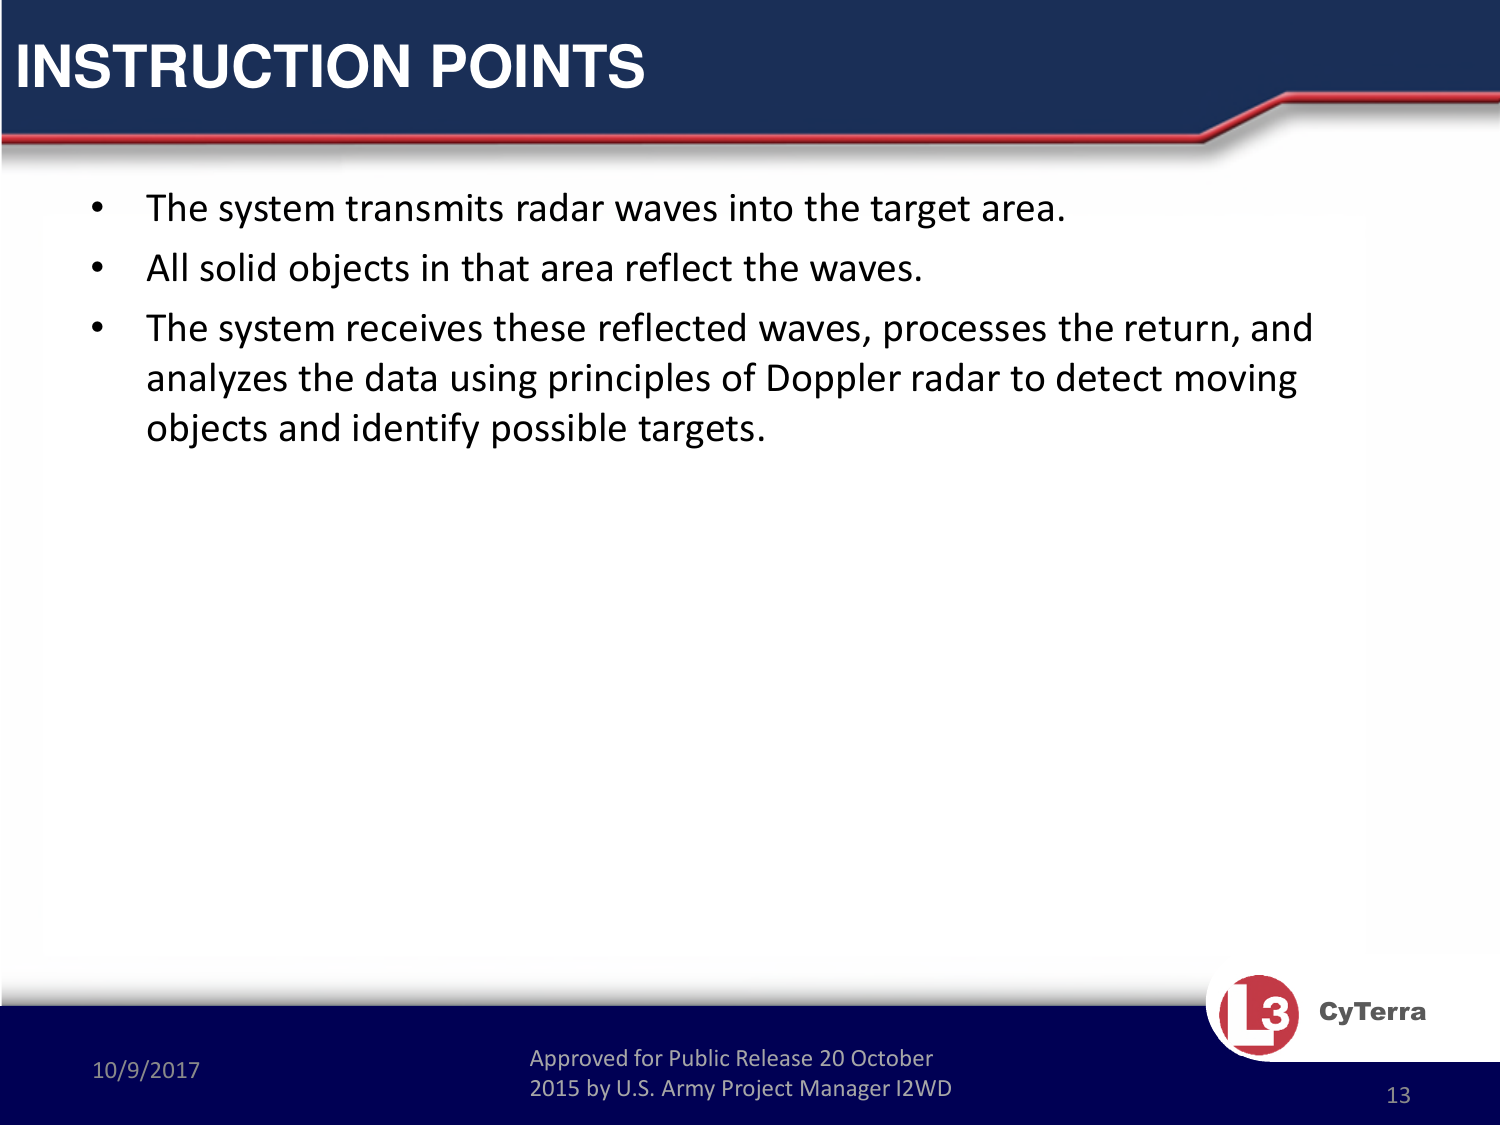 Approved for Public Release 20 October 2015 by U.S. Army Project Manager I2WD10/9/2017 Approved for Public Release 20 October 2015 by U.S. Army Project Manager I2WD 13CyTerra•The system transmits radar waves into the target area.  •All solid objects in that area reflect the waves.  •The system receives these reflected waves, processes the return, and analyzes the data using principles of Doppler radar to detect moving objects and identify possible targets.INSTRUCTION POINTS